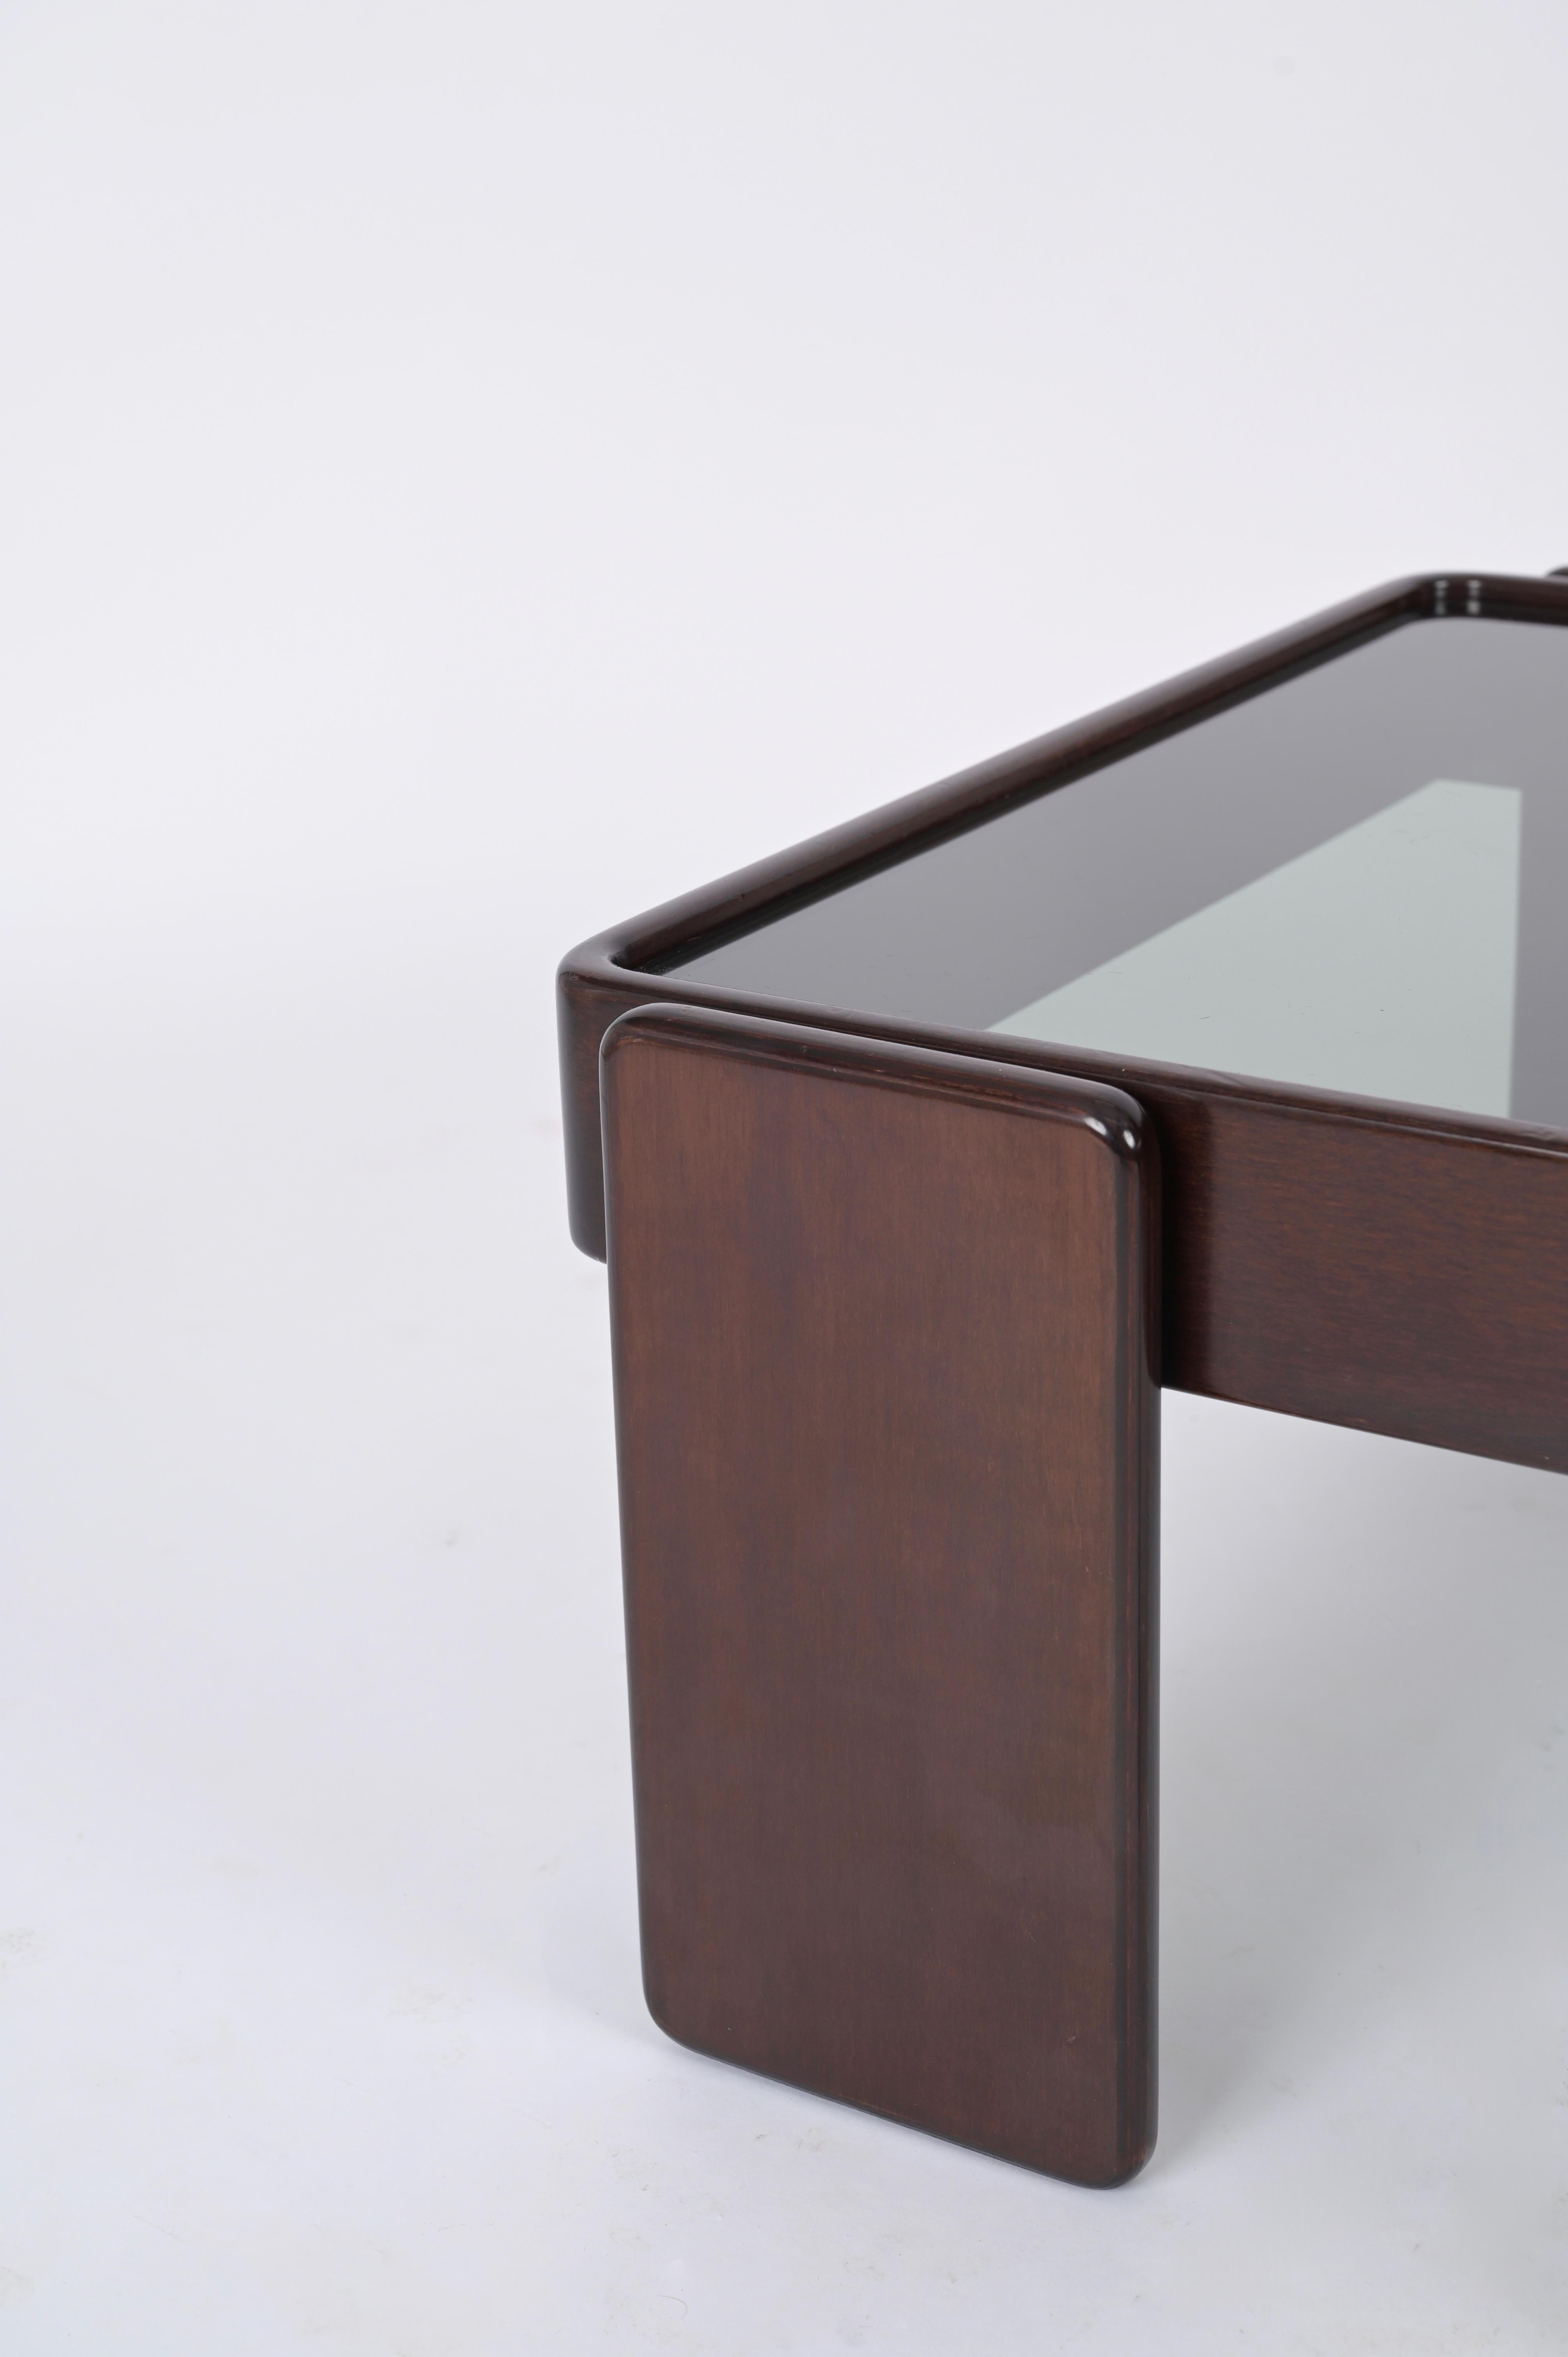 Square Coffee Table with Smoked Glass by Frattini for Cassina, Italy, 1970s For Sale 4